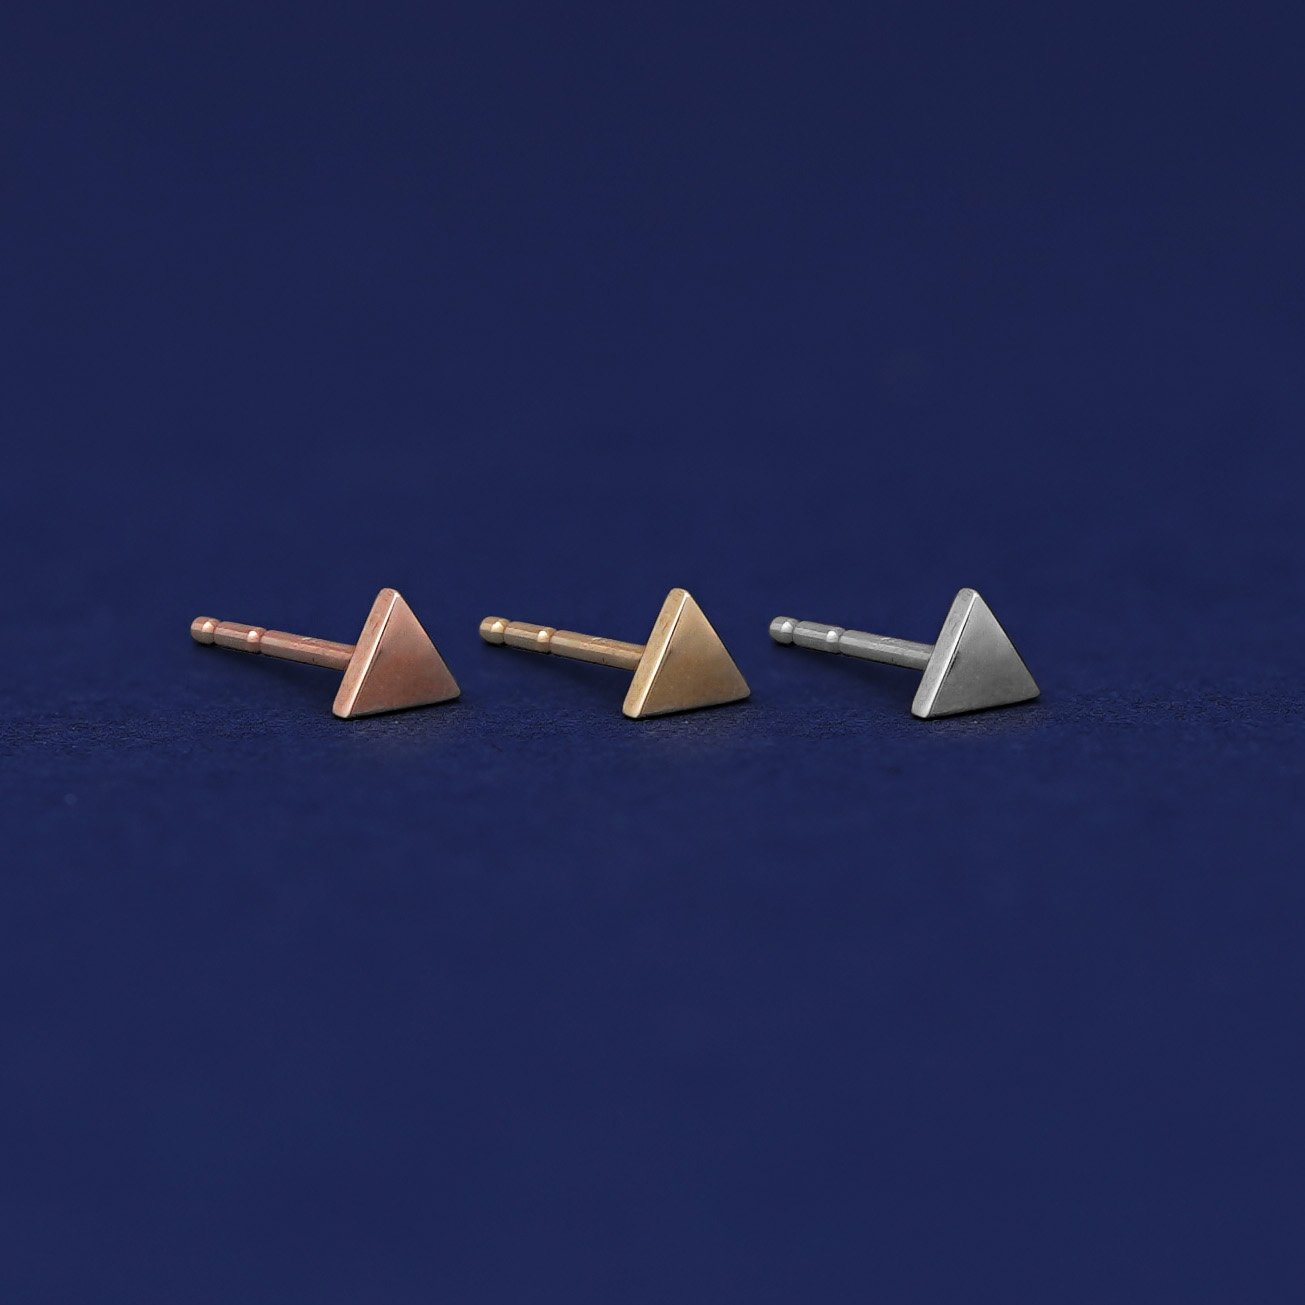 Three versions of the Triangle Earring shown in options of rose, yellow, and white gold